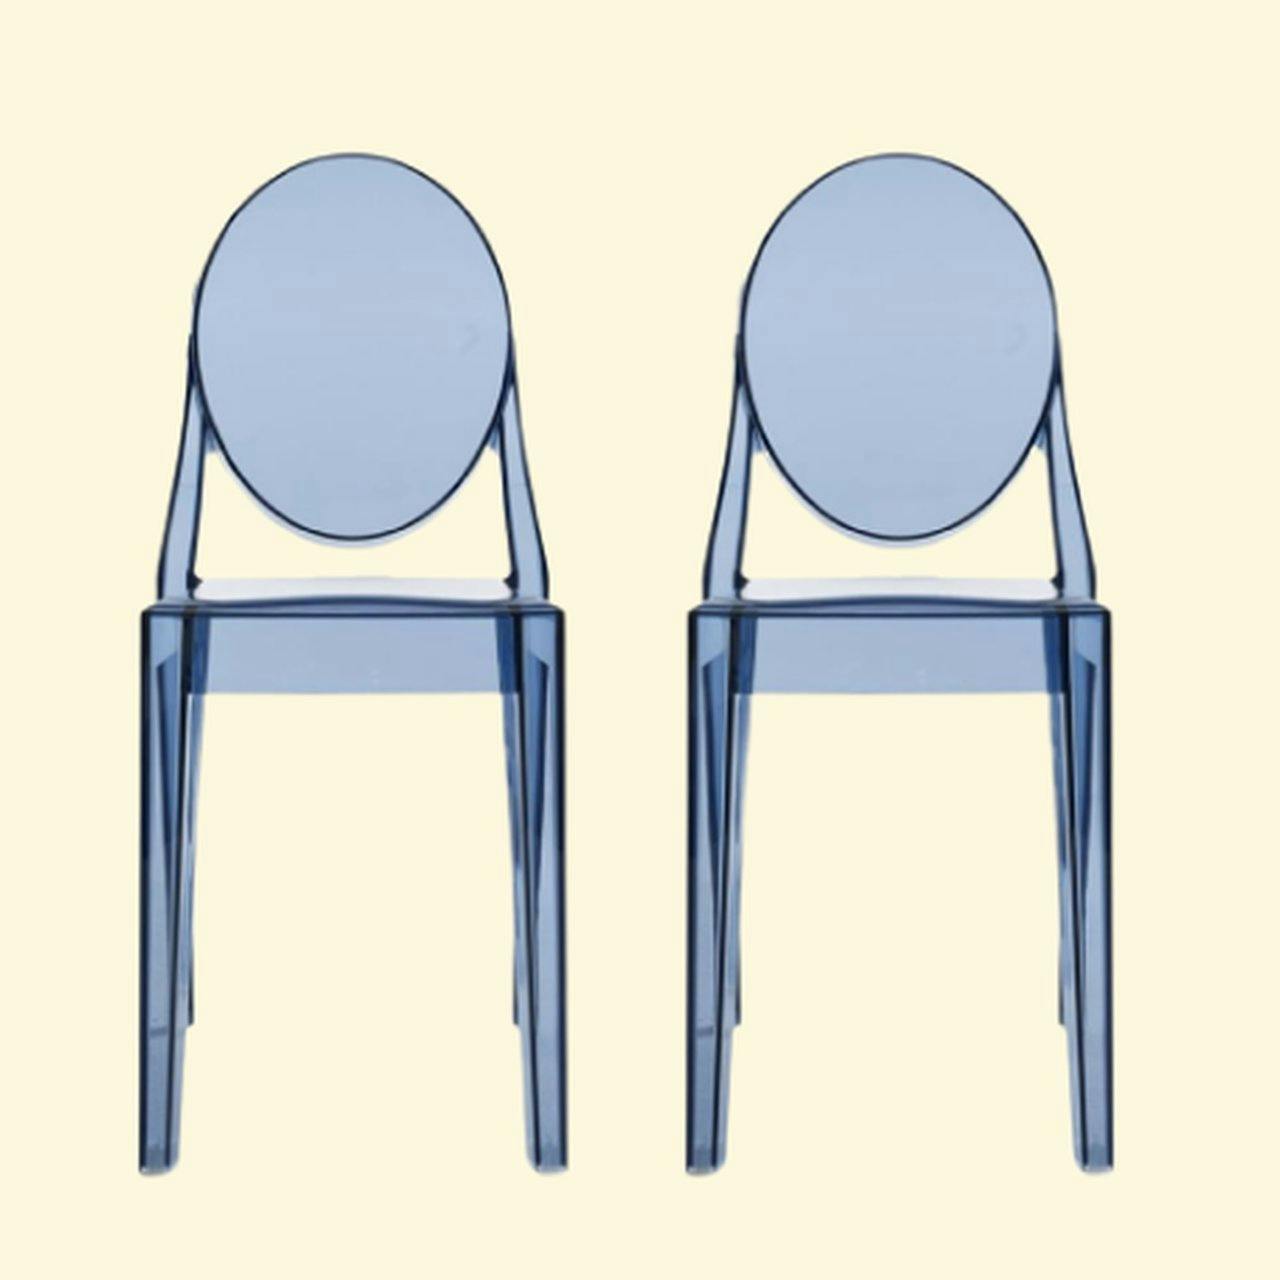 Sitland Dining chairs